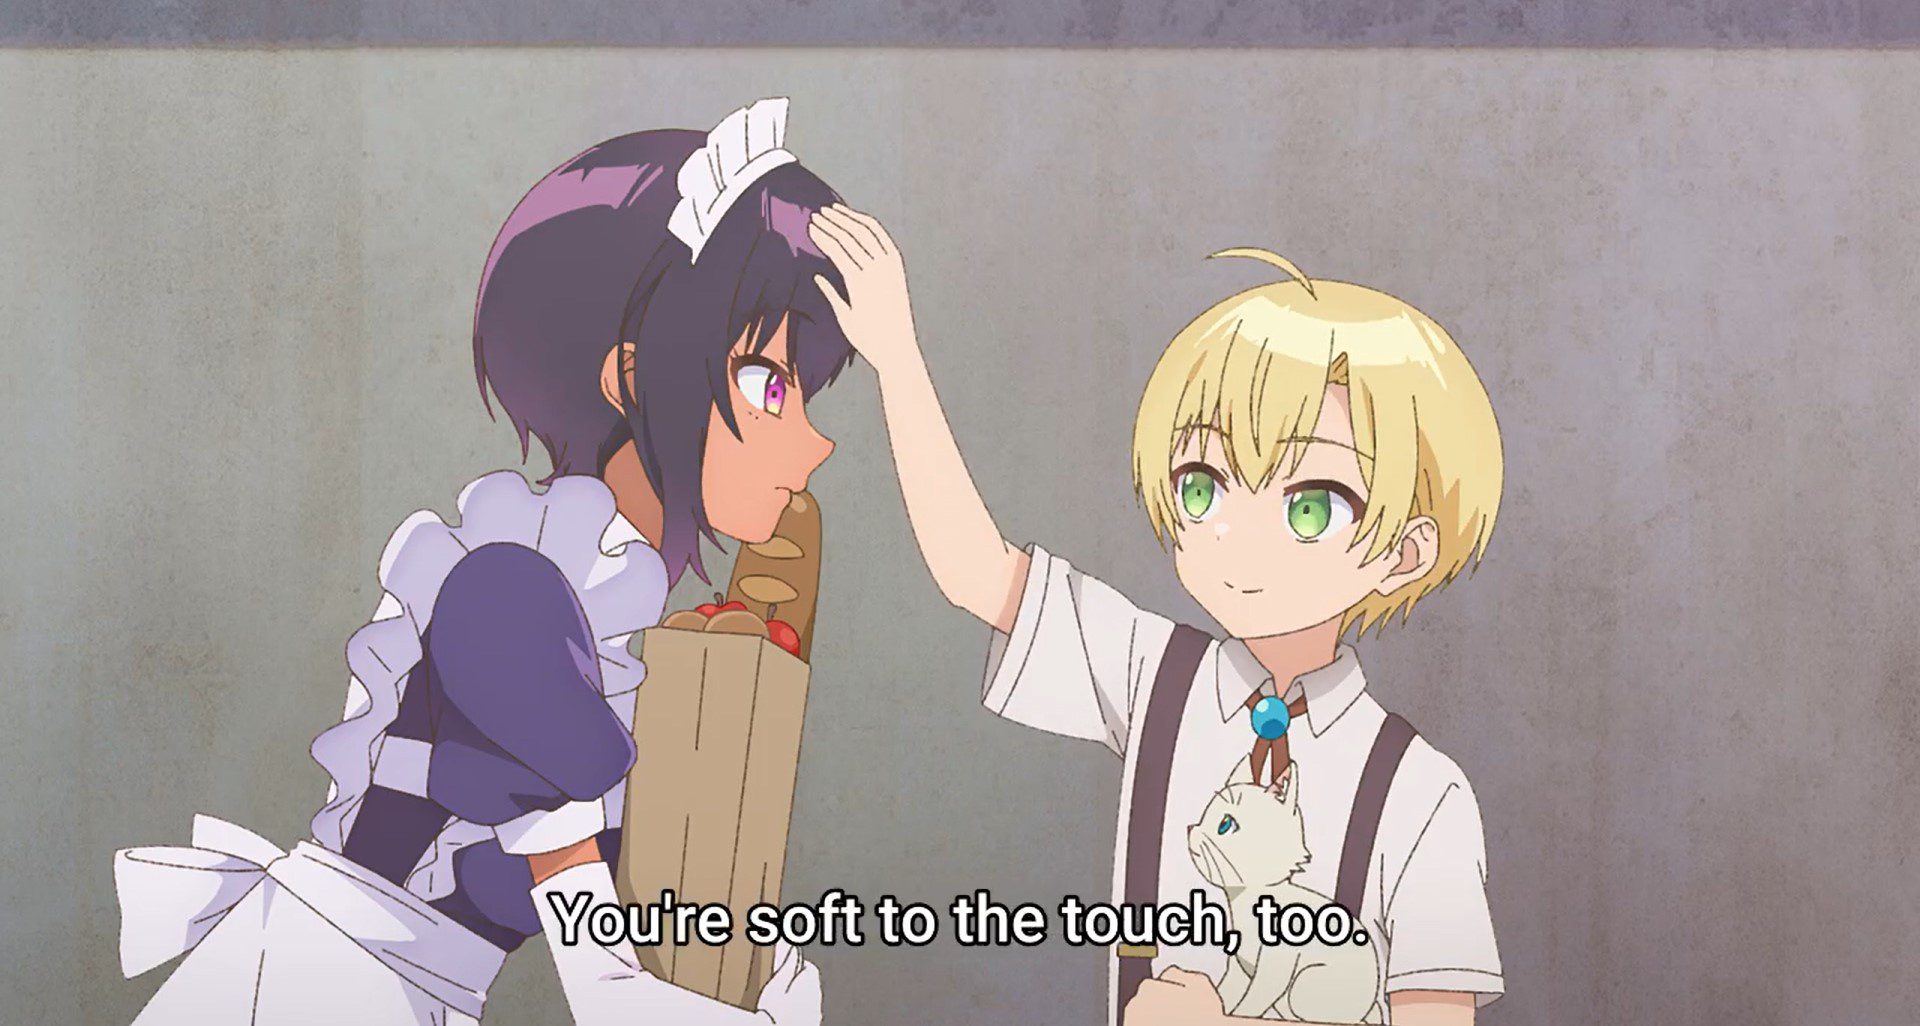 The Maid I Recently Hired Is Mysterious Episode 2 Recap